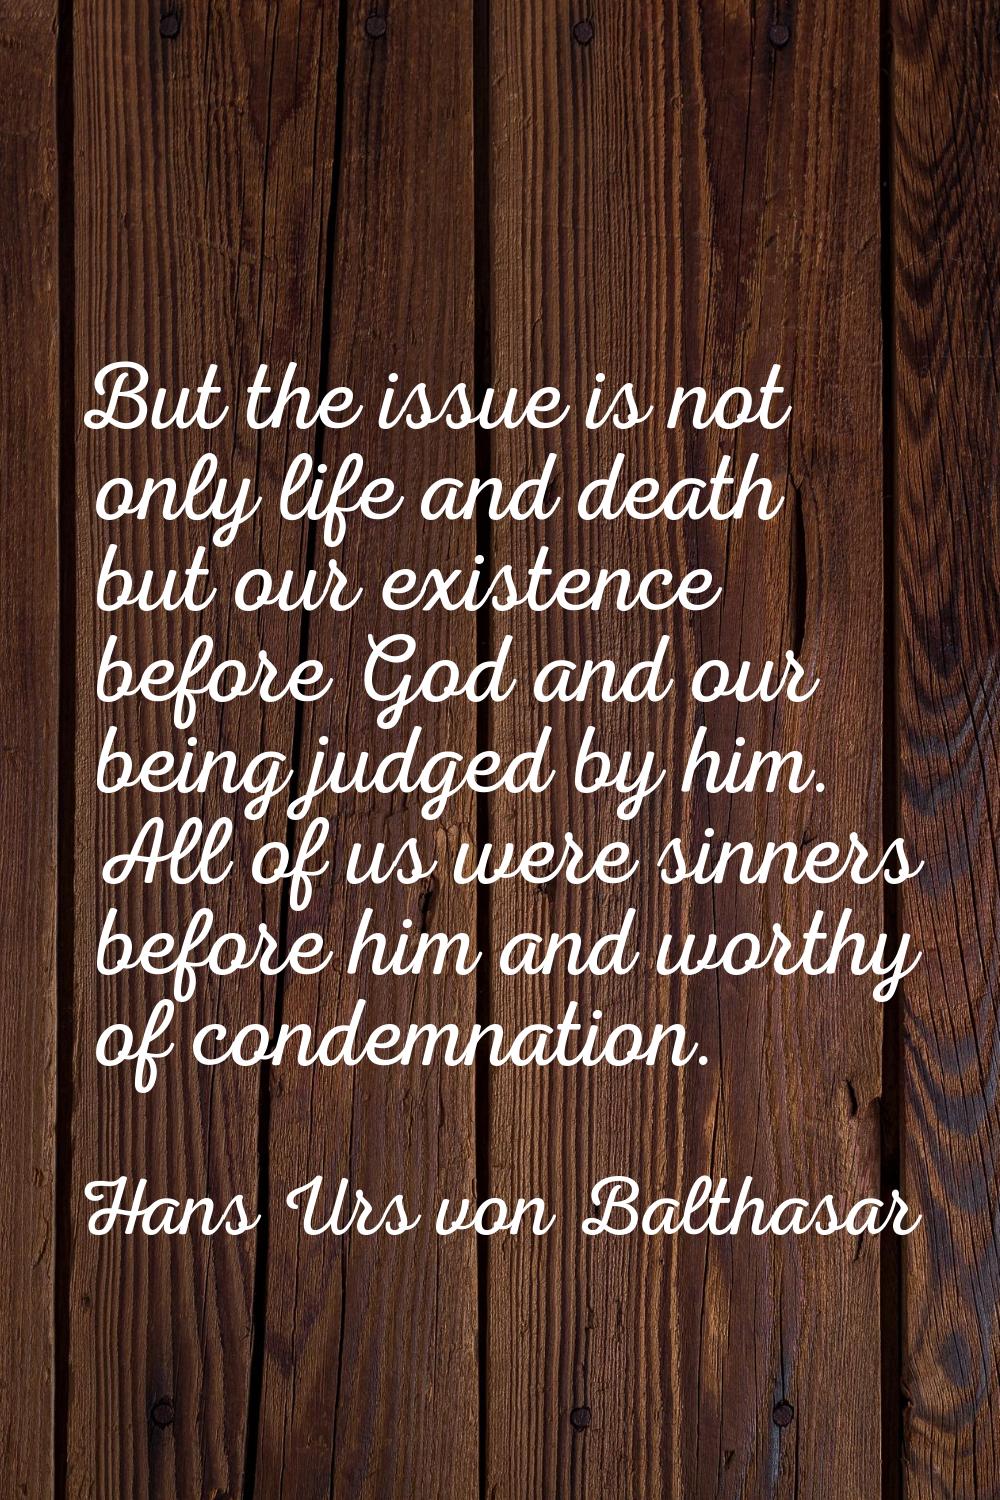 But the issue is not only life and death but our existence before God and our being judged by him. 